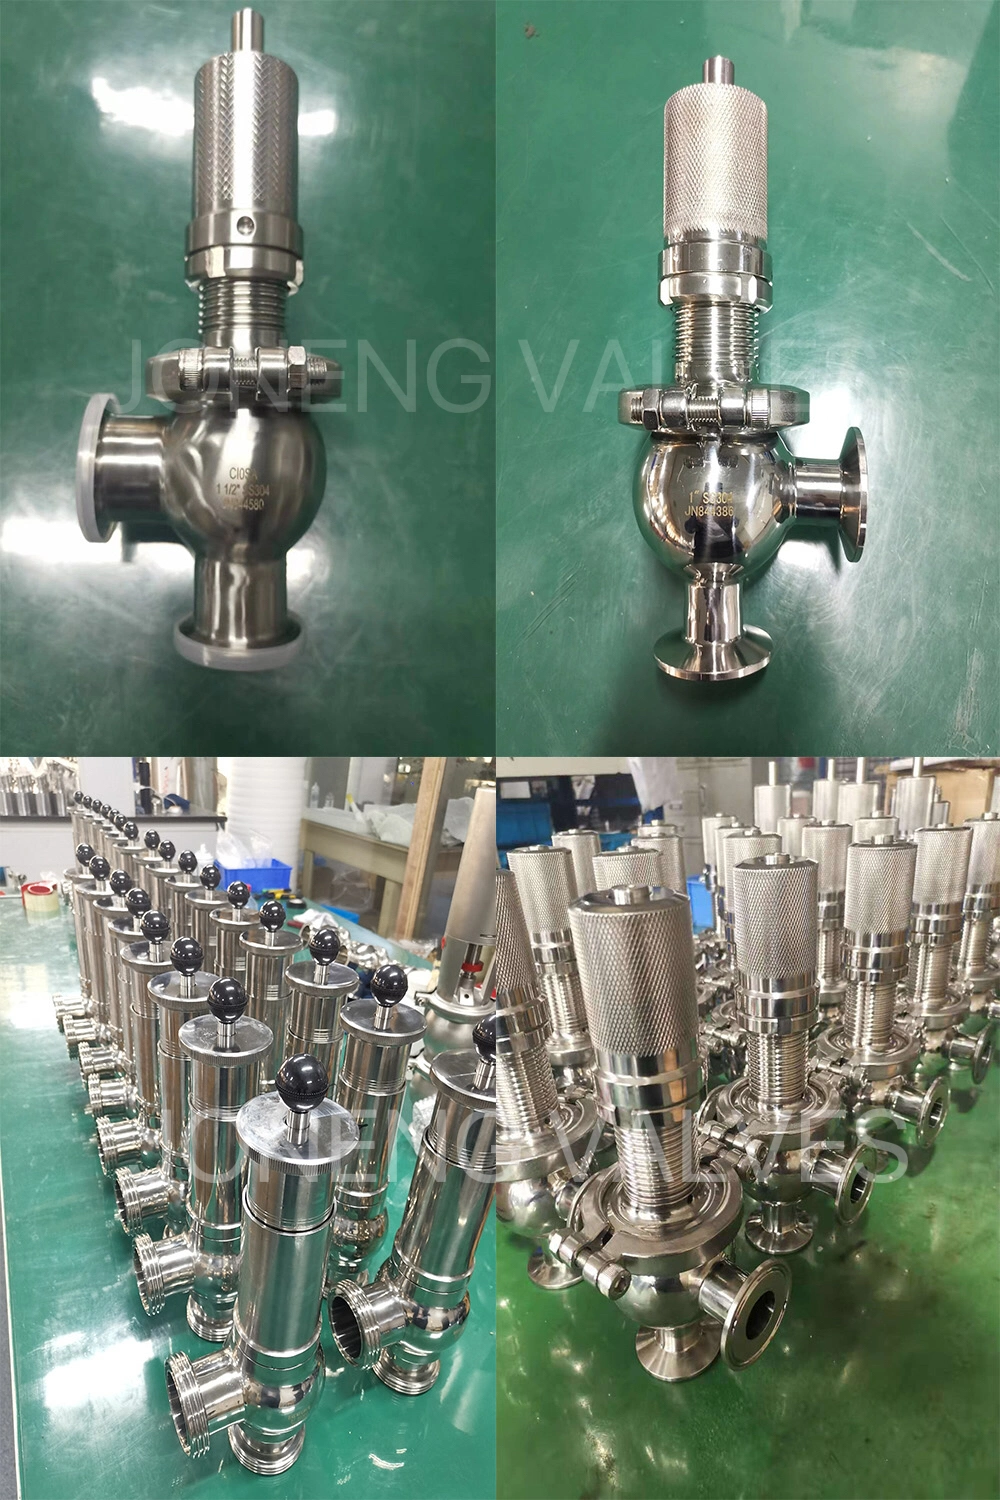 Stainless Steel Sanitary Air Pressure Release Safety Relief Reducing Valve